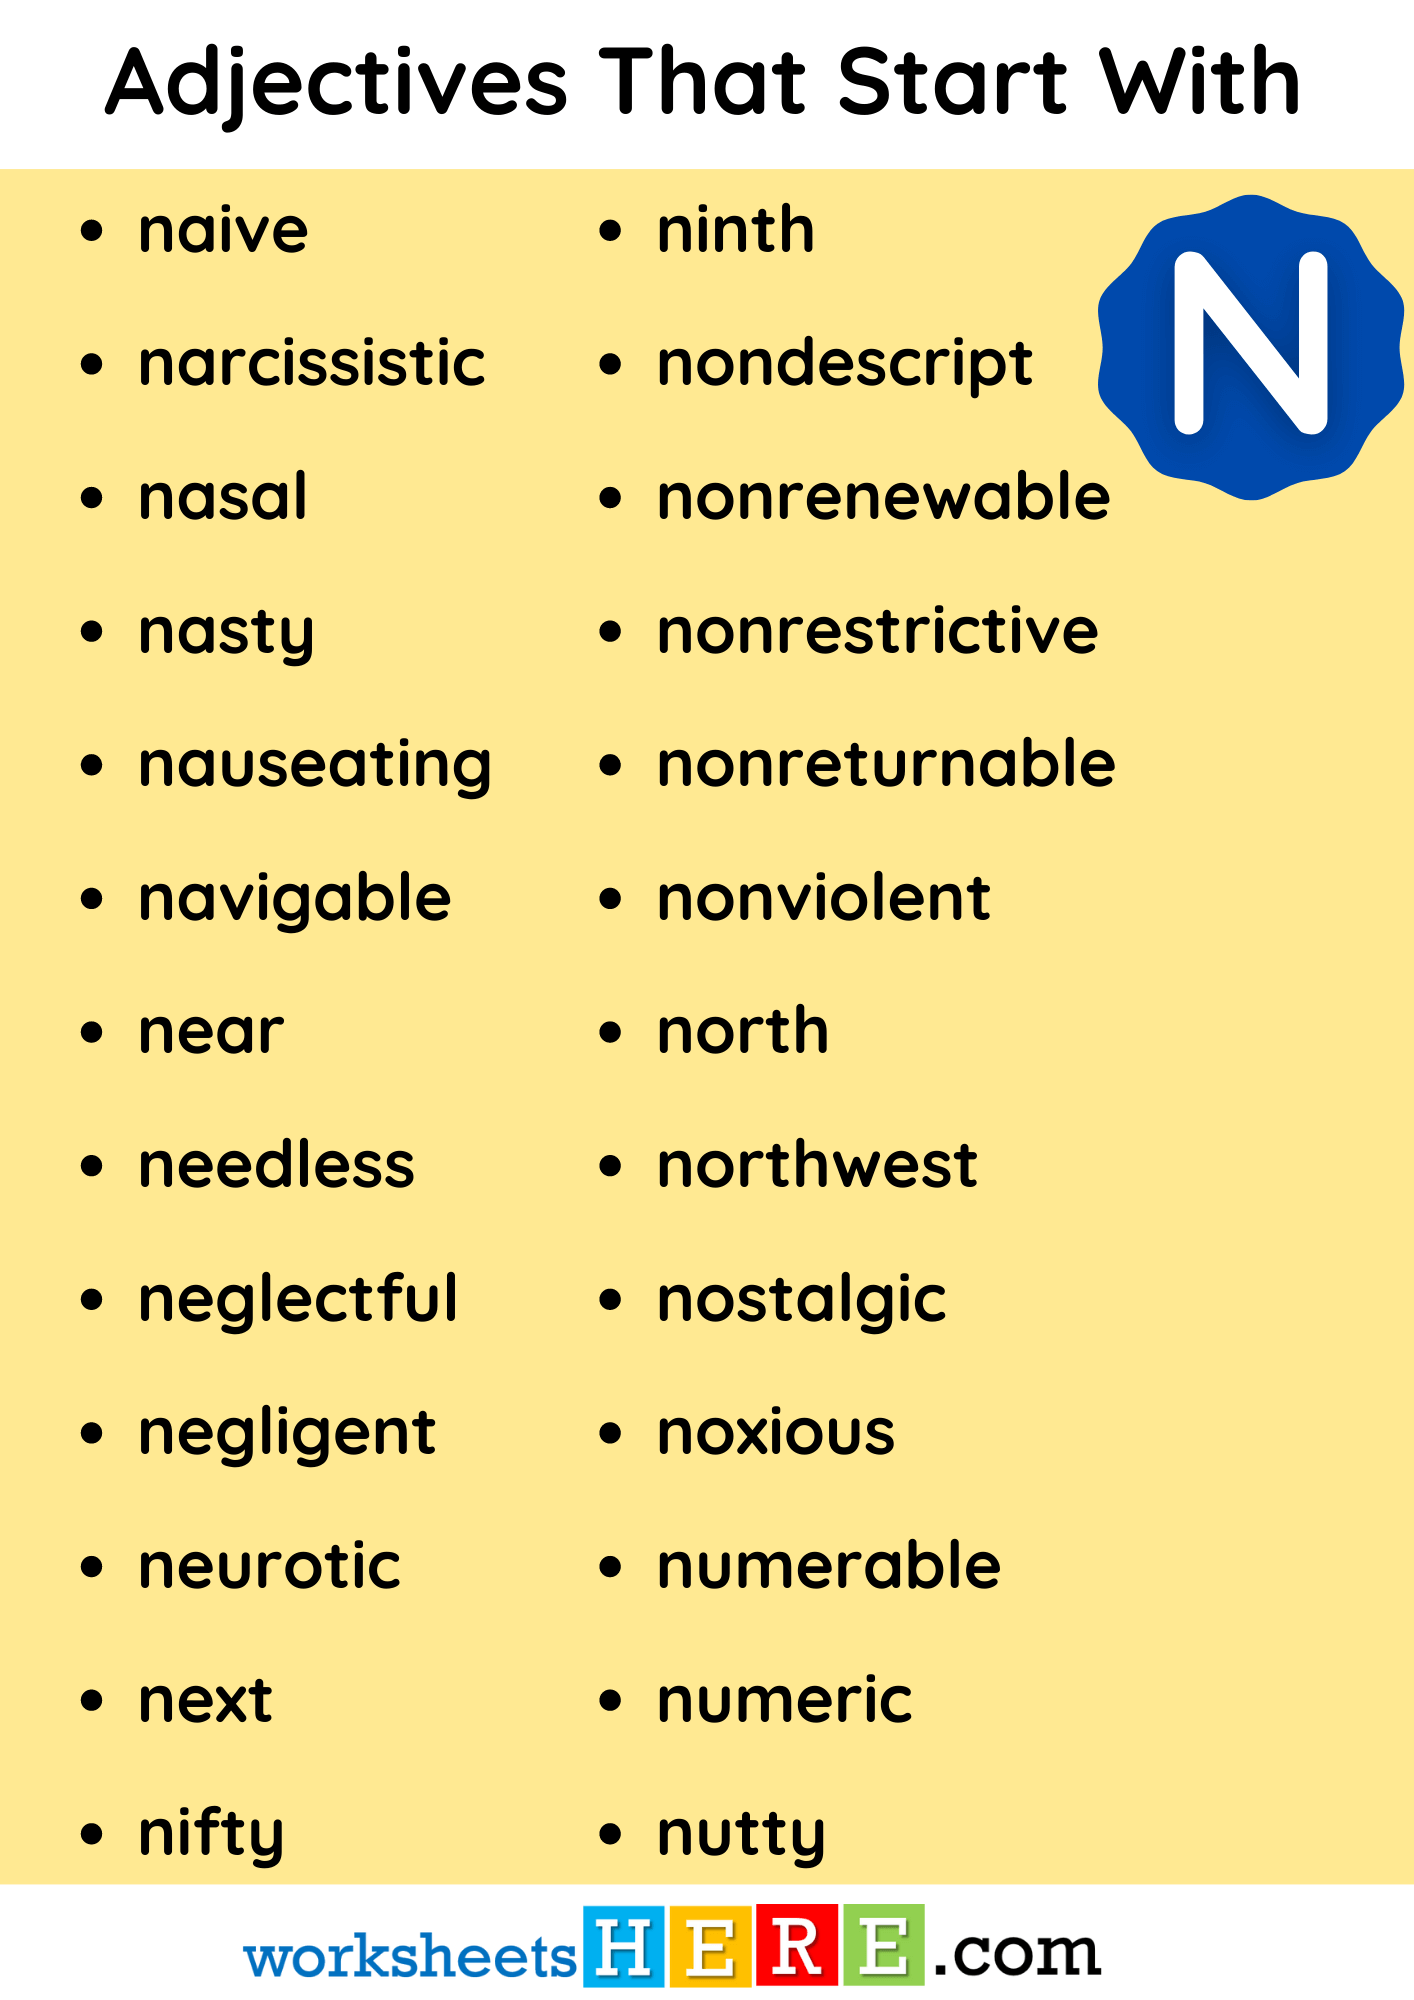 Adjectives That Start With N Vocabulary List PDF Worksheet For Students